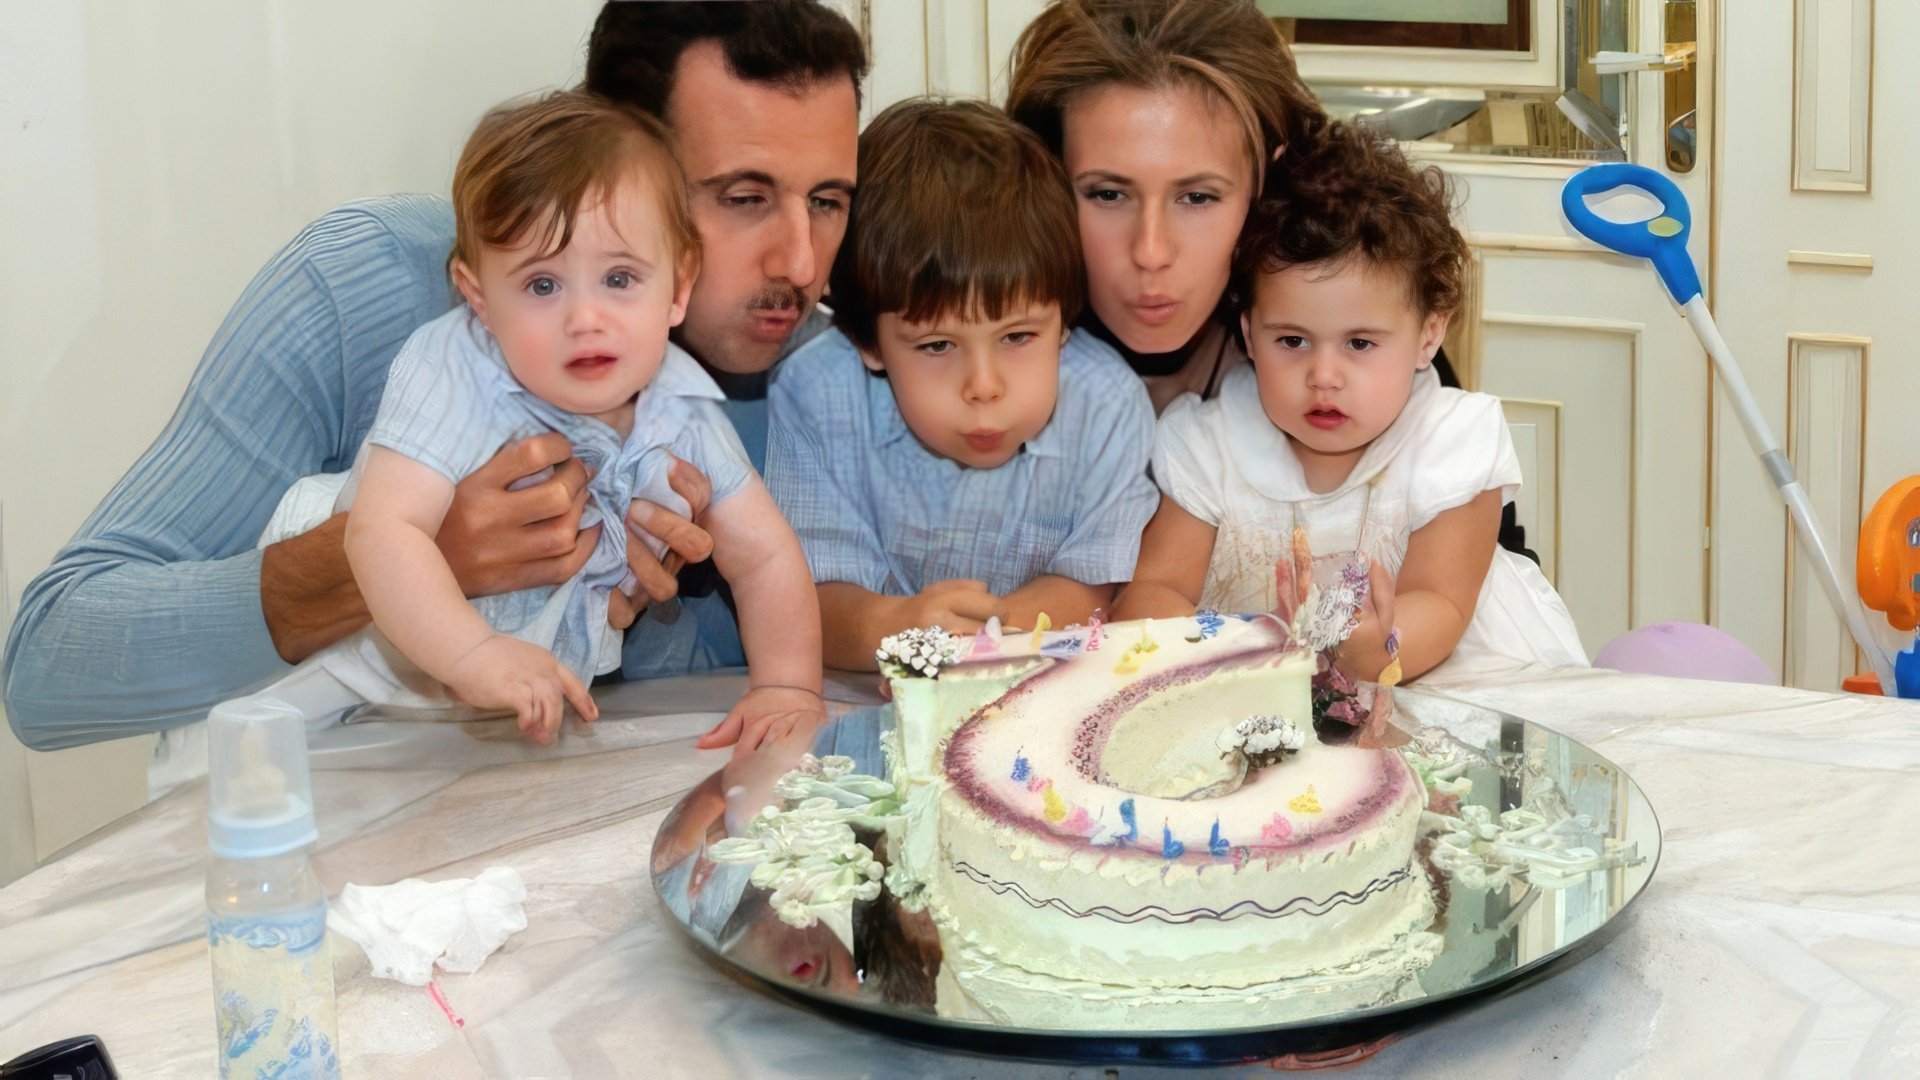 Bashar Al-Assad with his wife and children